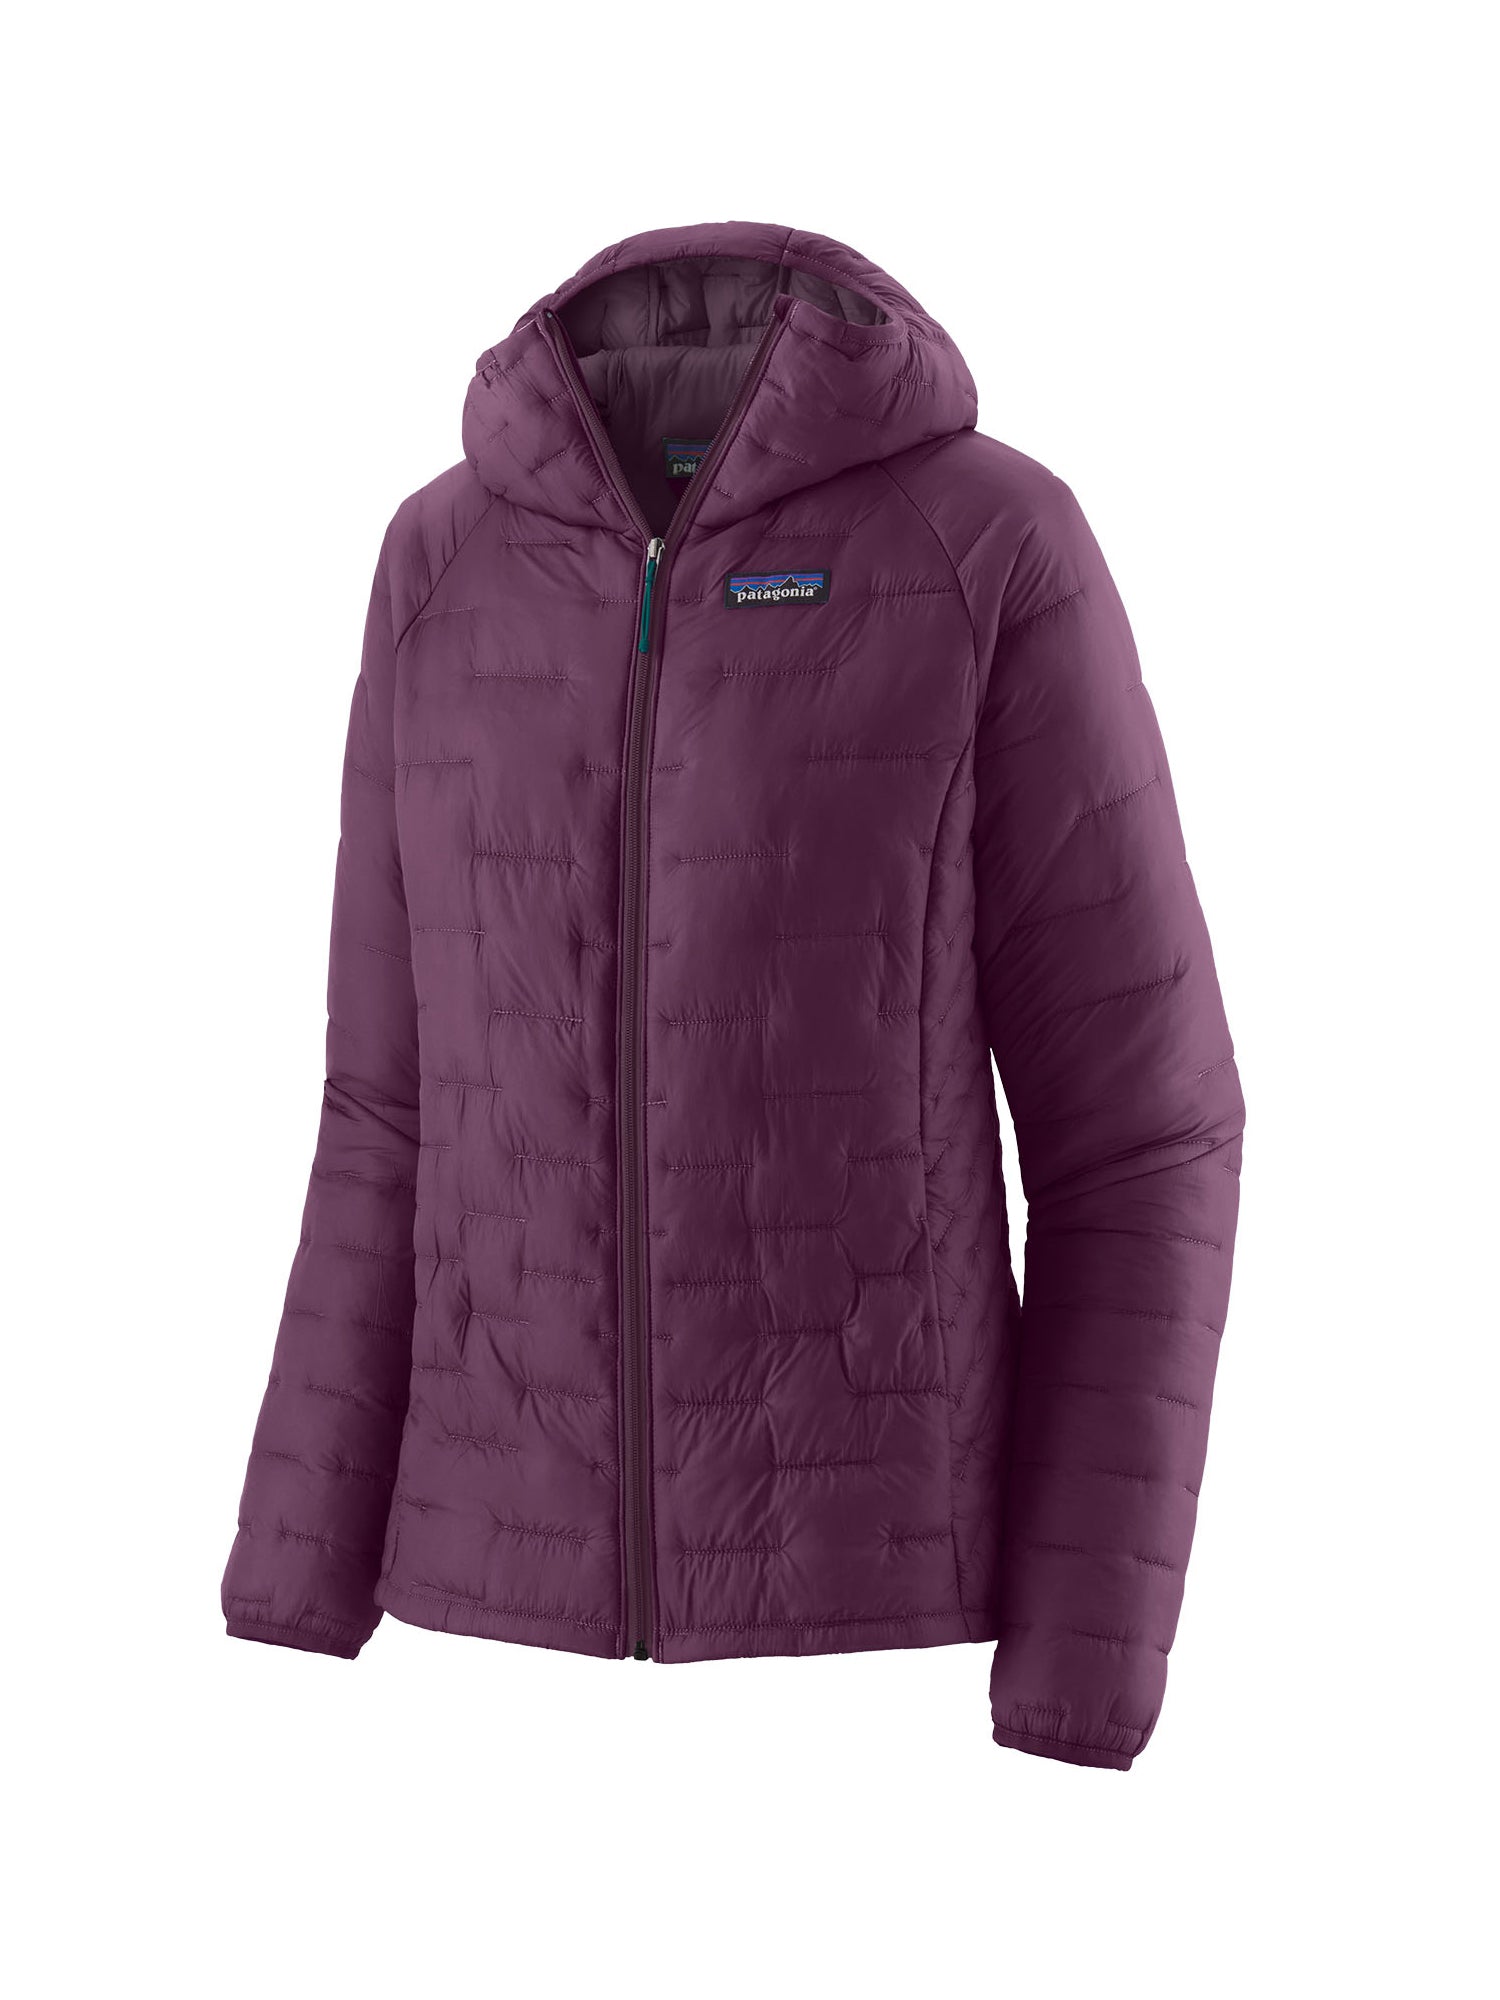 Patagonia Womens Micro Down Zip Jacket Size X Small 